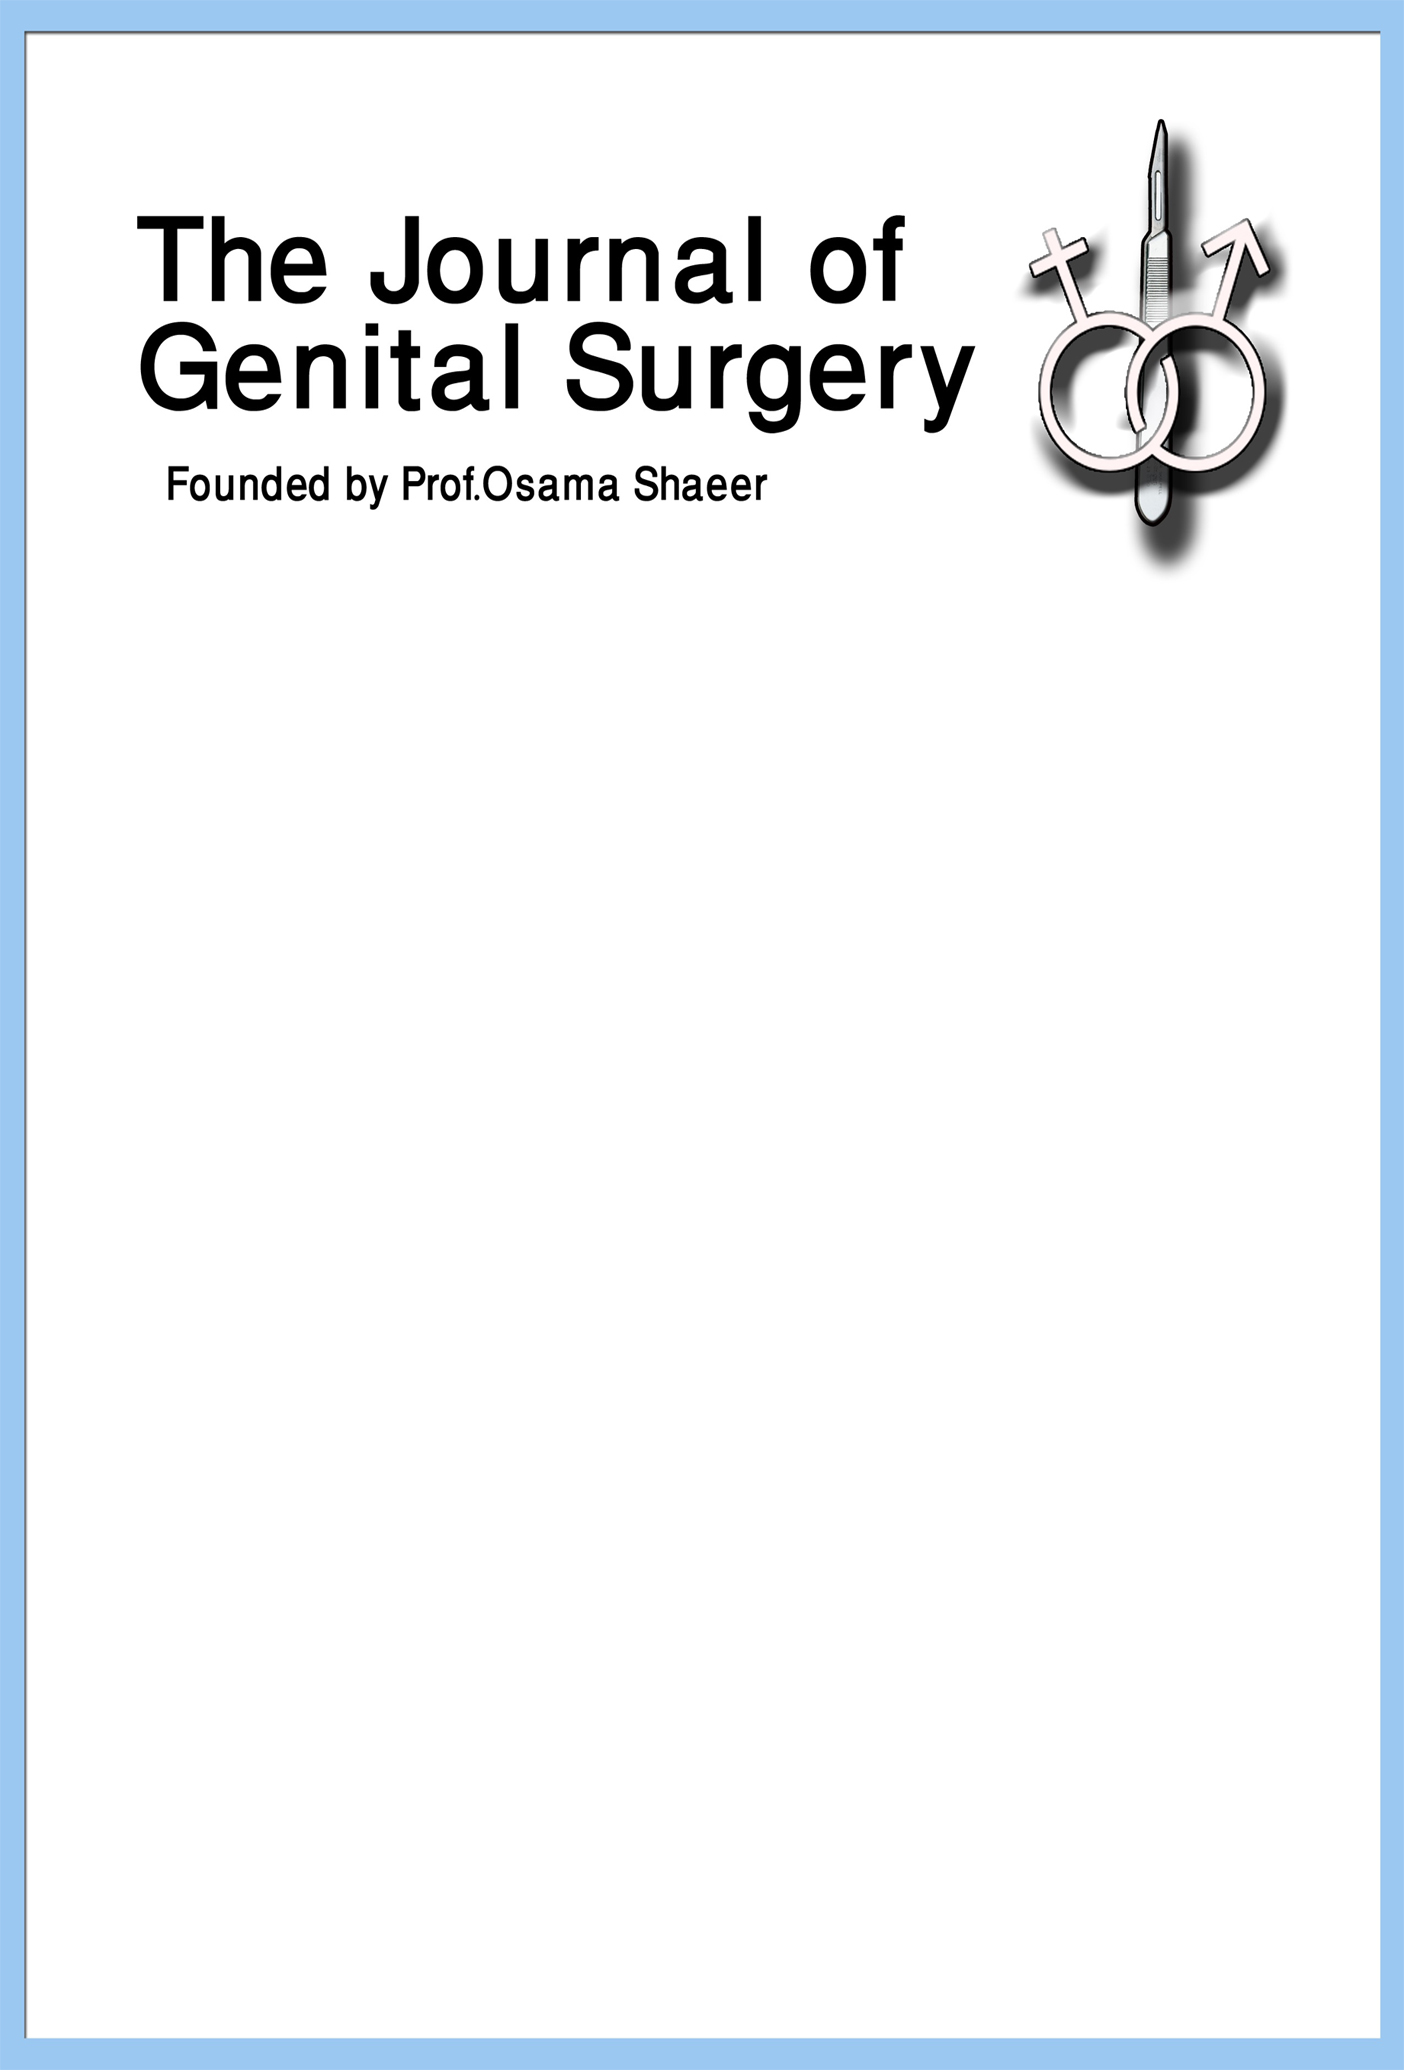 The Journal of Genital Surgery